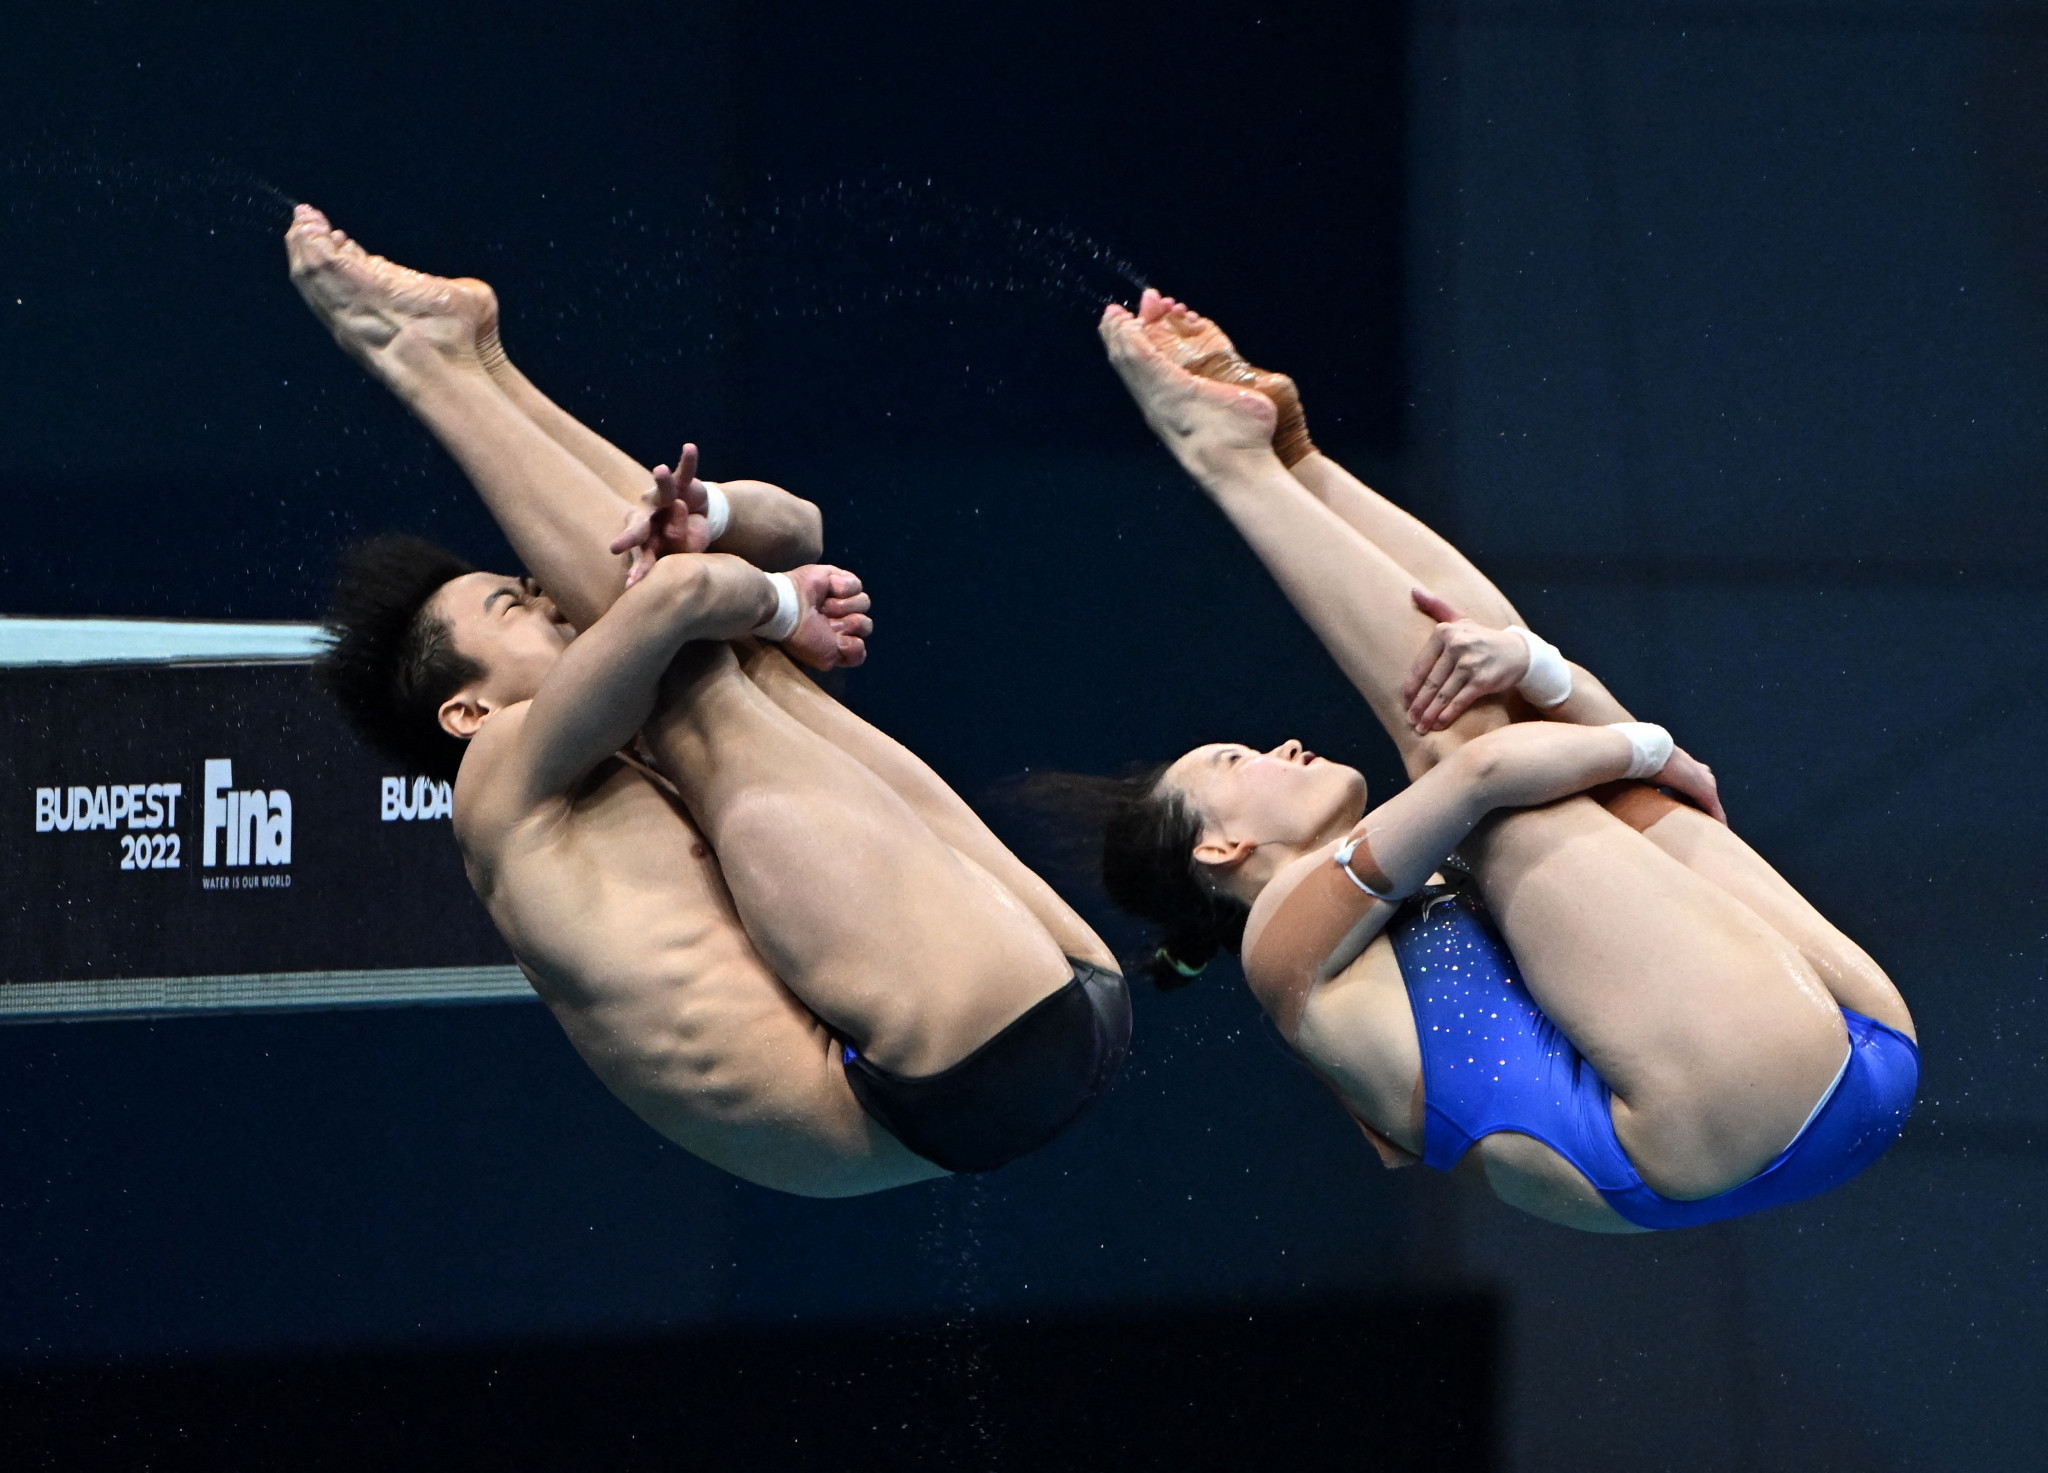 China's Duan Yu, left, and Ren Qian, right, topped the scoring in all five rounds of the mixed 10m platform synchronised diving event ©Getty Images